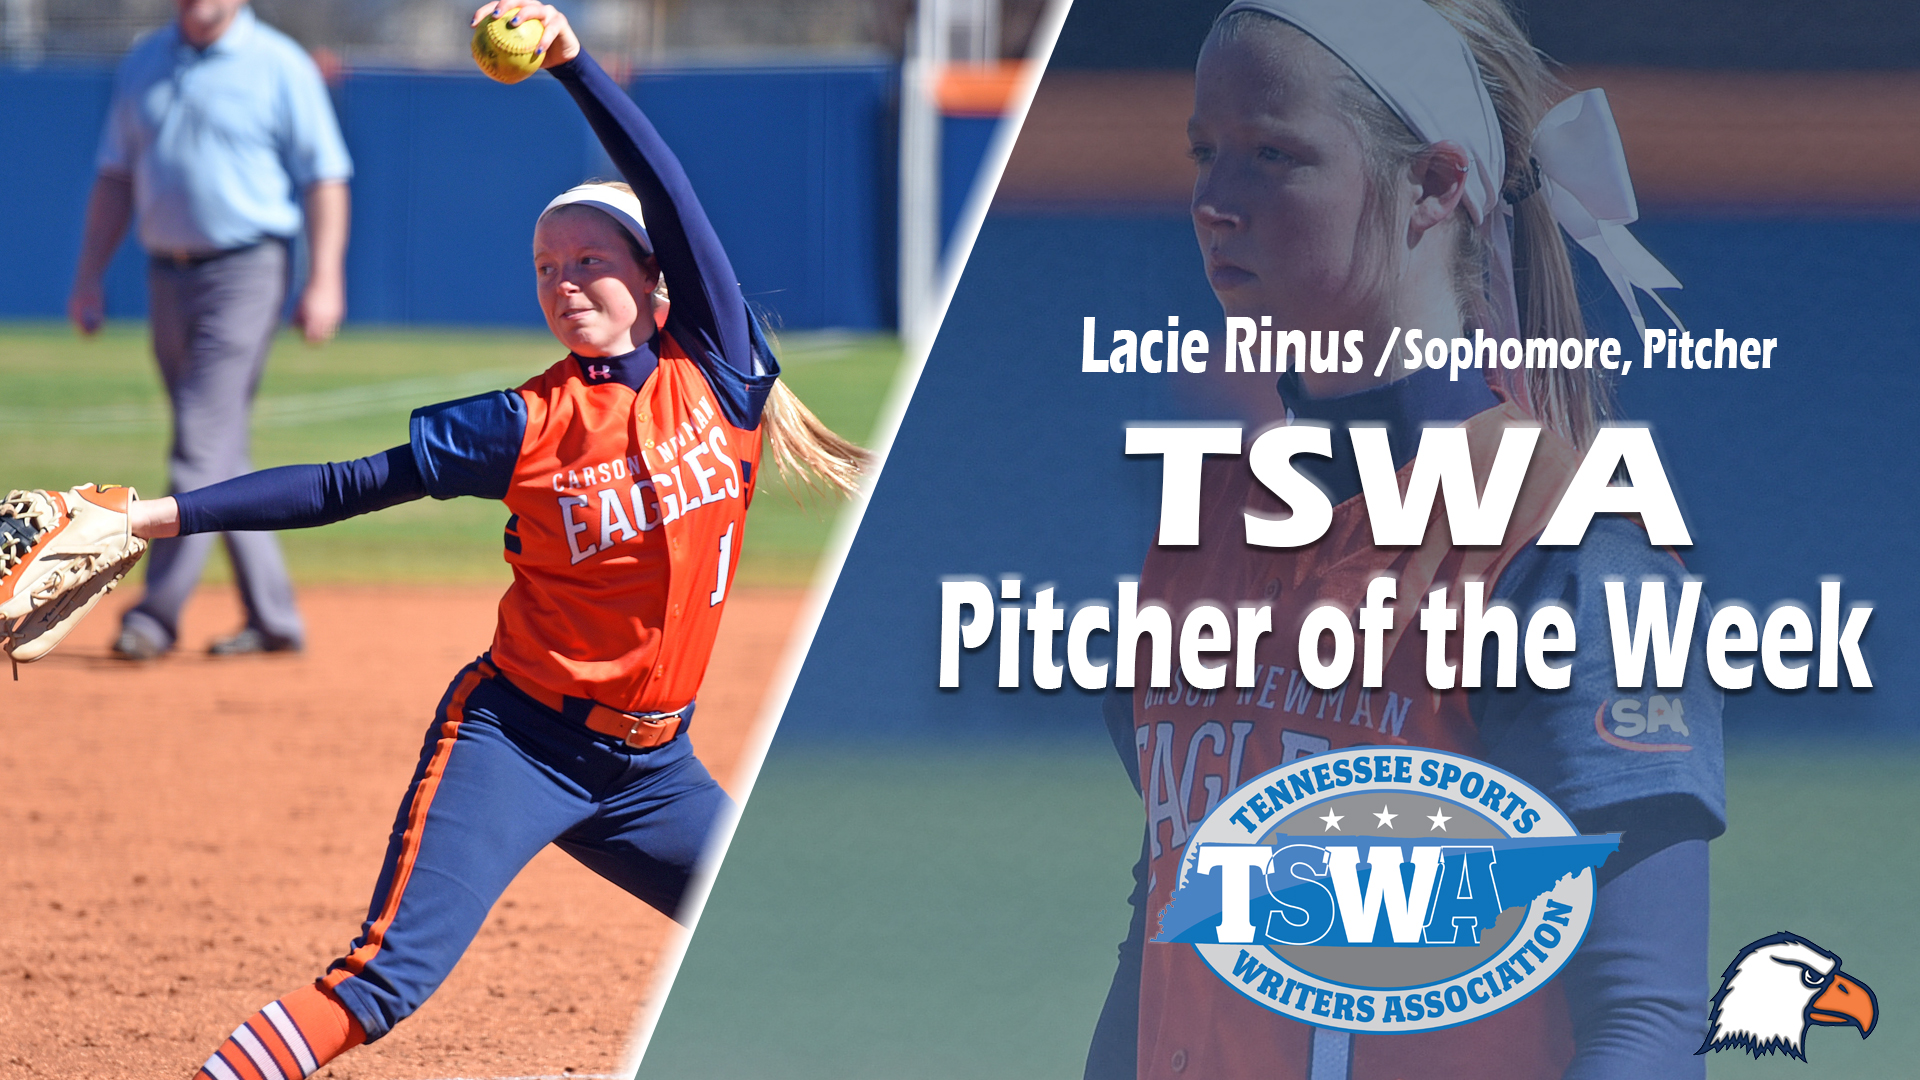 Pitcher of the Week plaudit number four, Rinus honored by TSWA